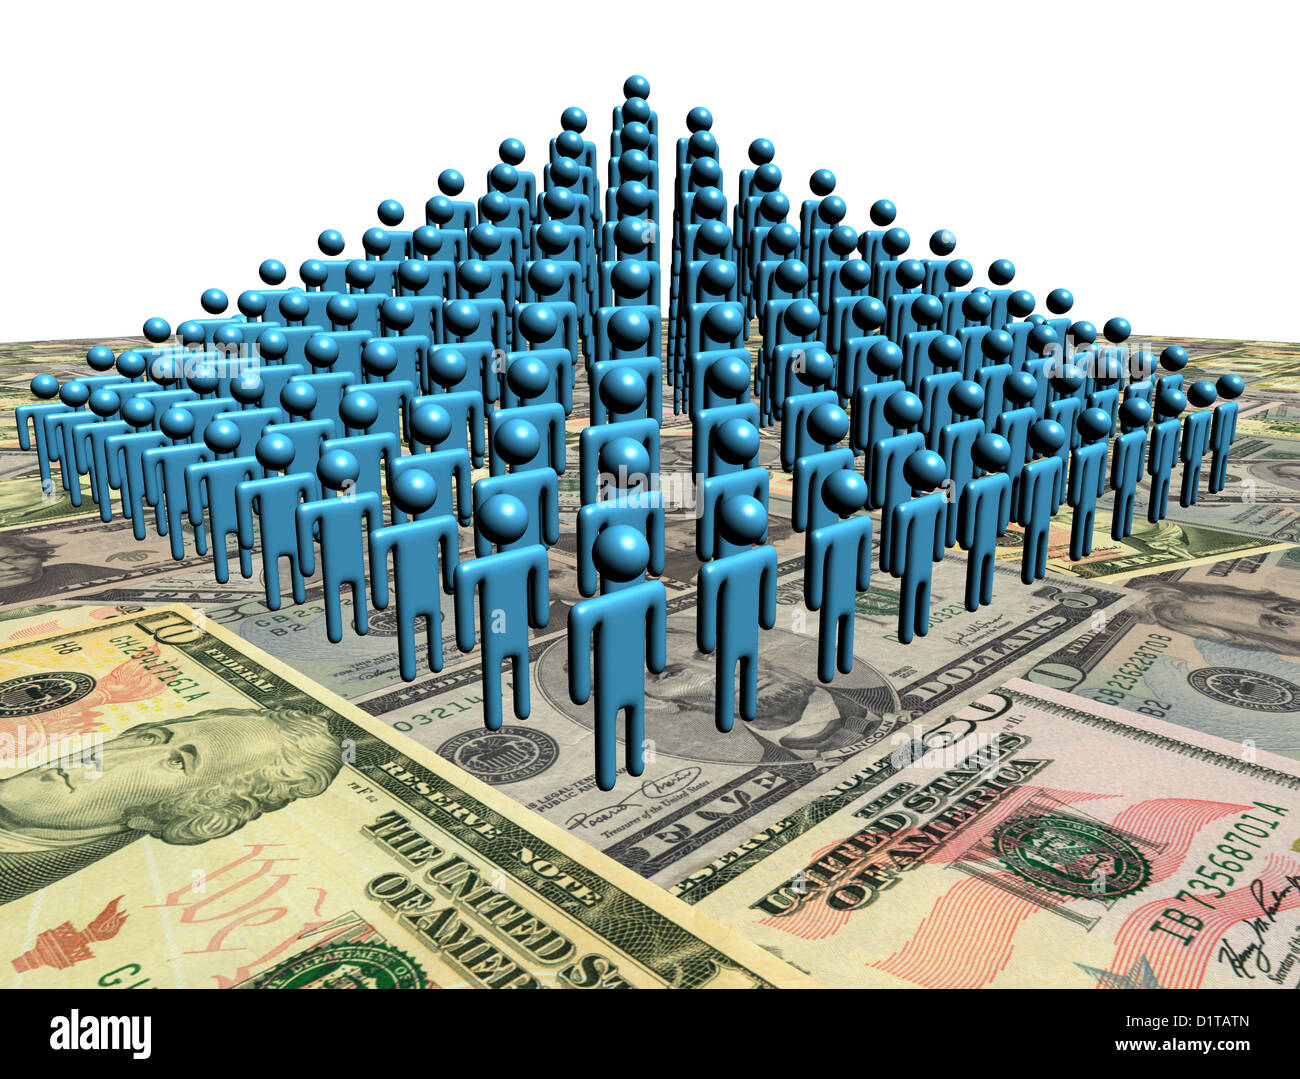 Pyramid of abstract people on American dollars illustration Stock Photo